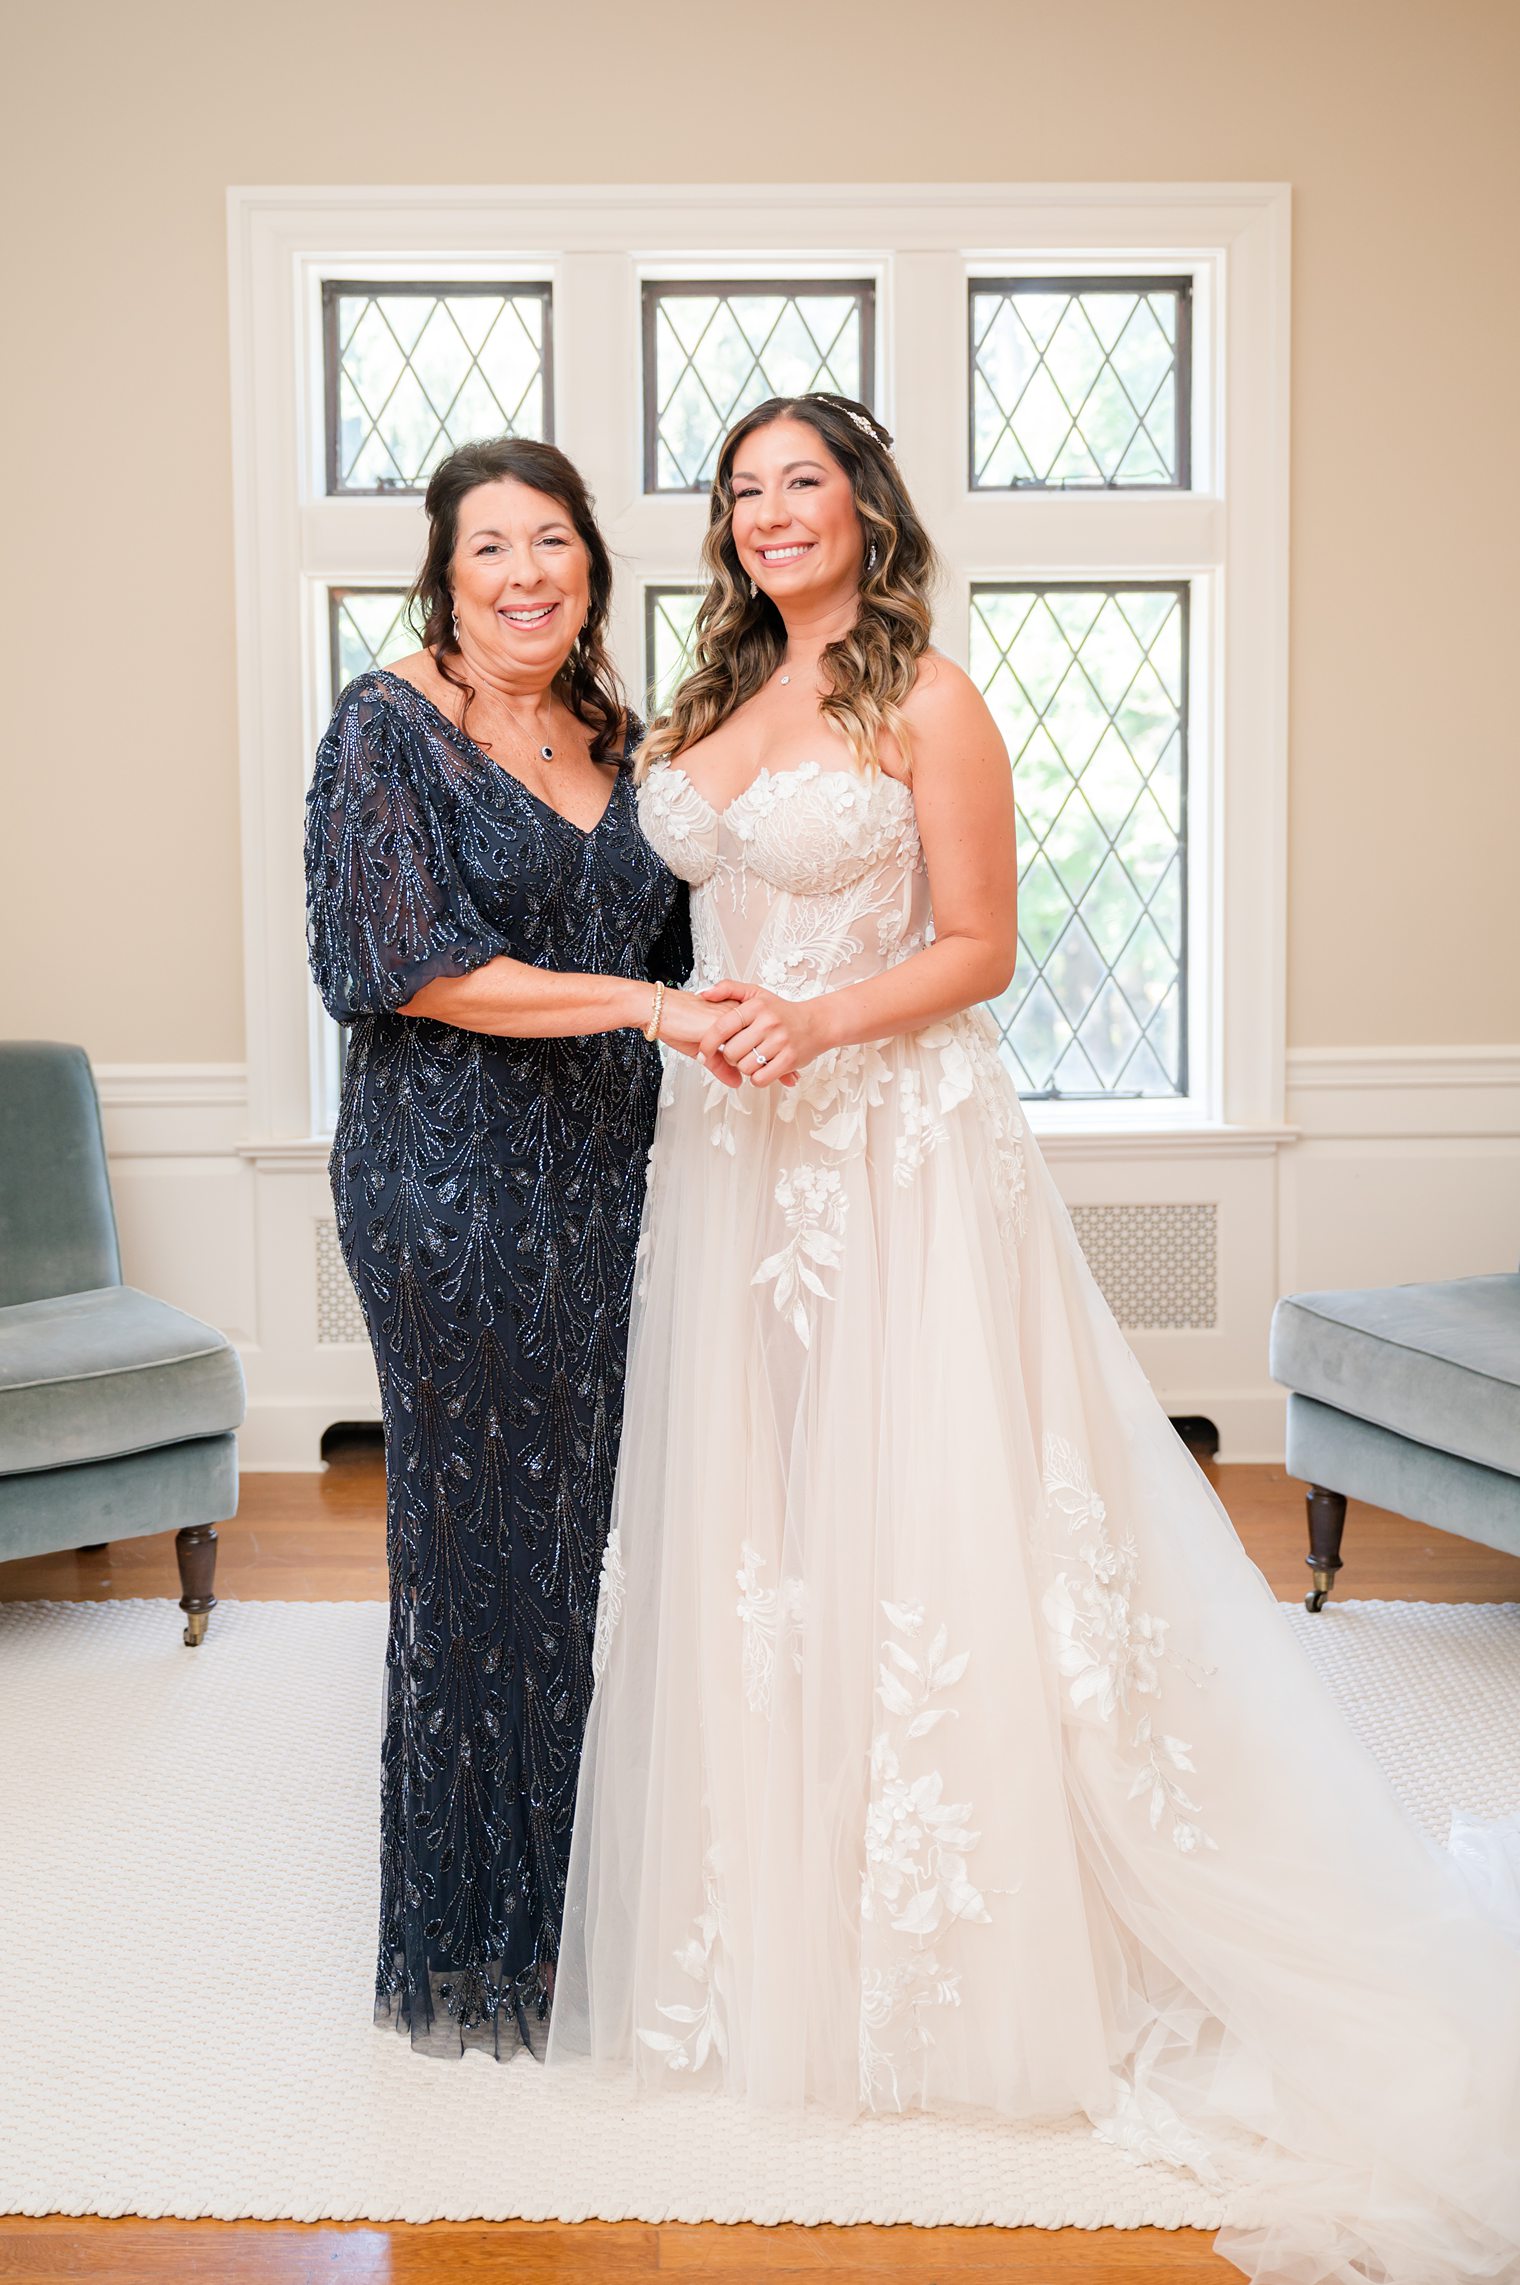 Bride and her mother ready to enjoy a big day